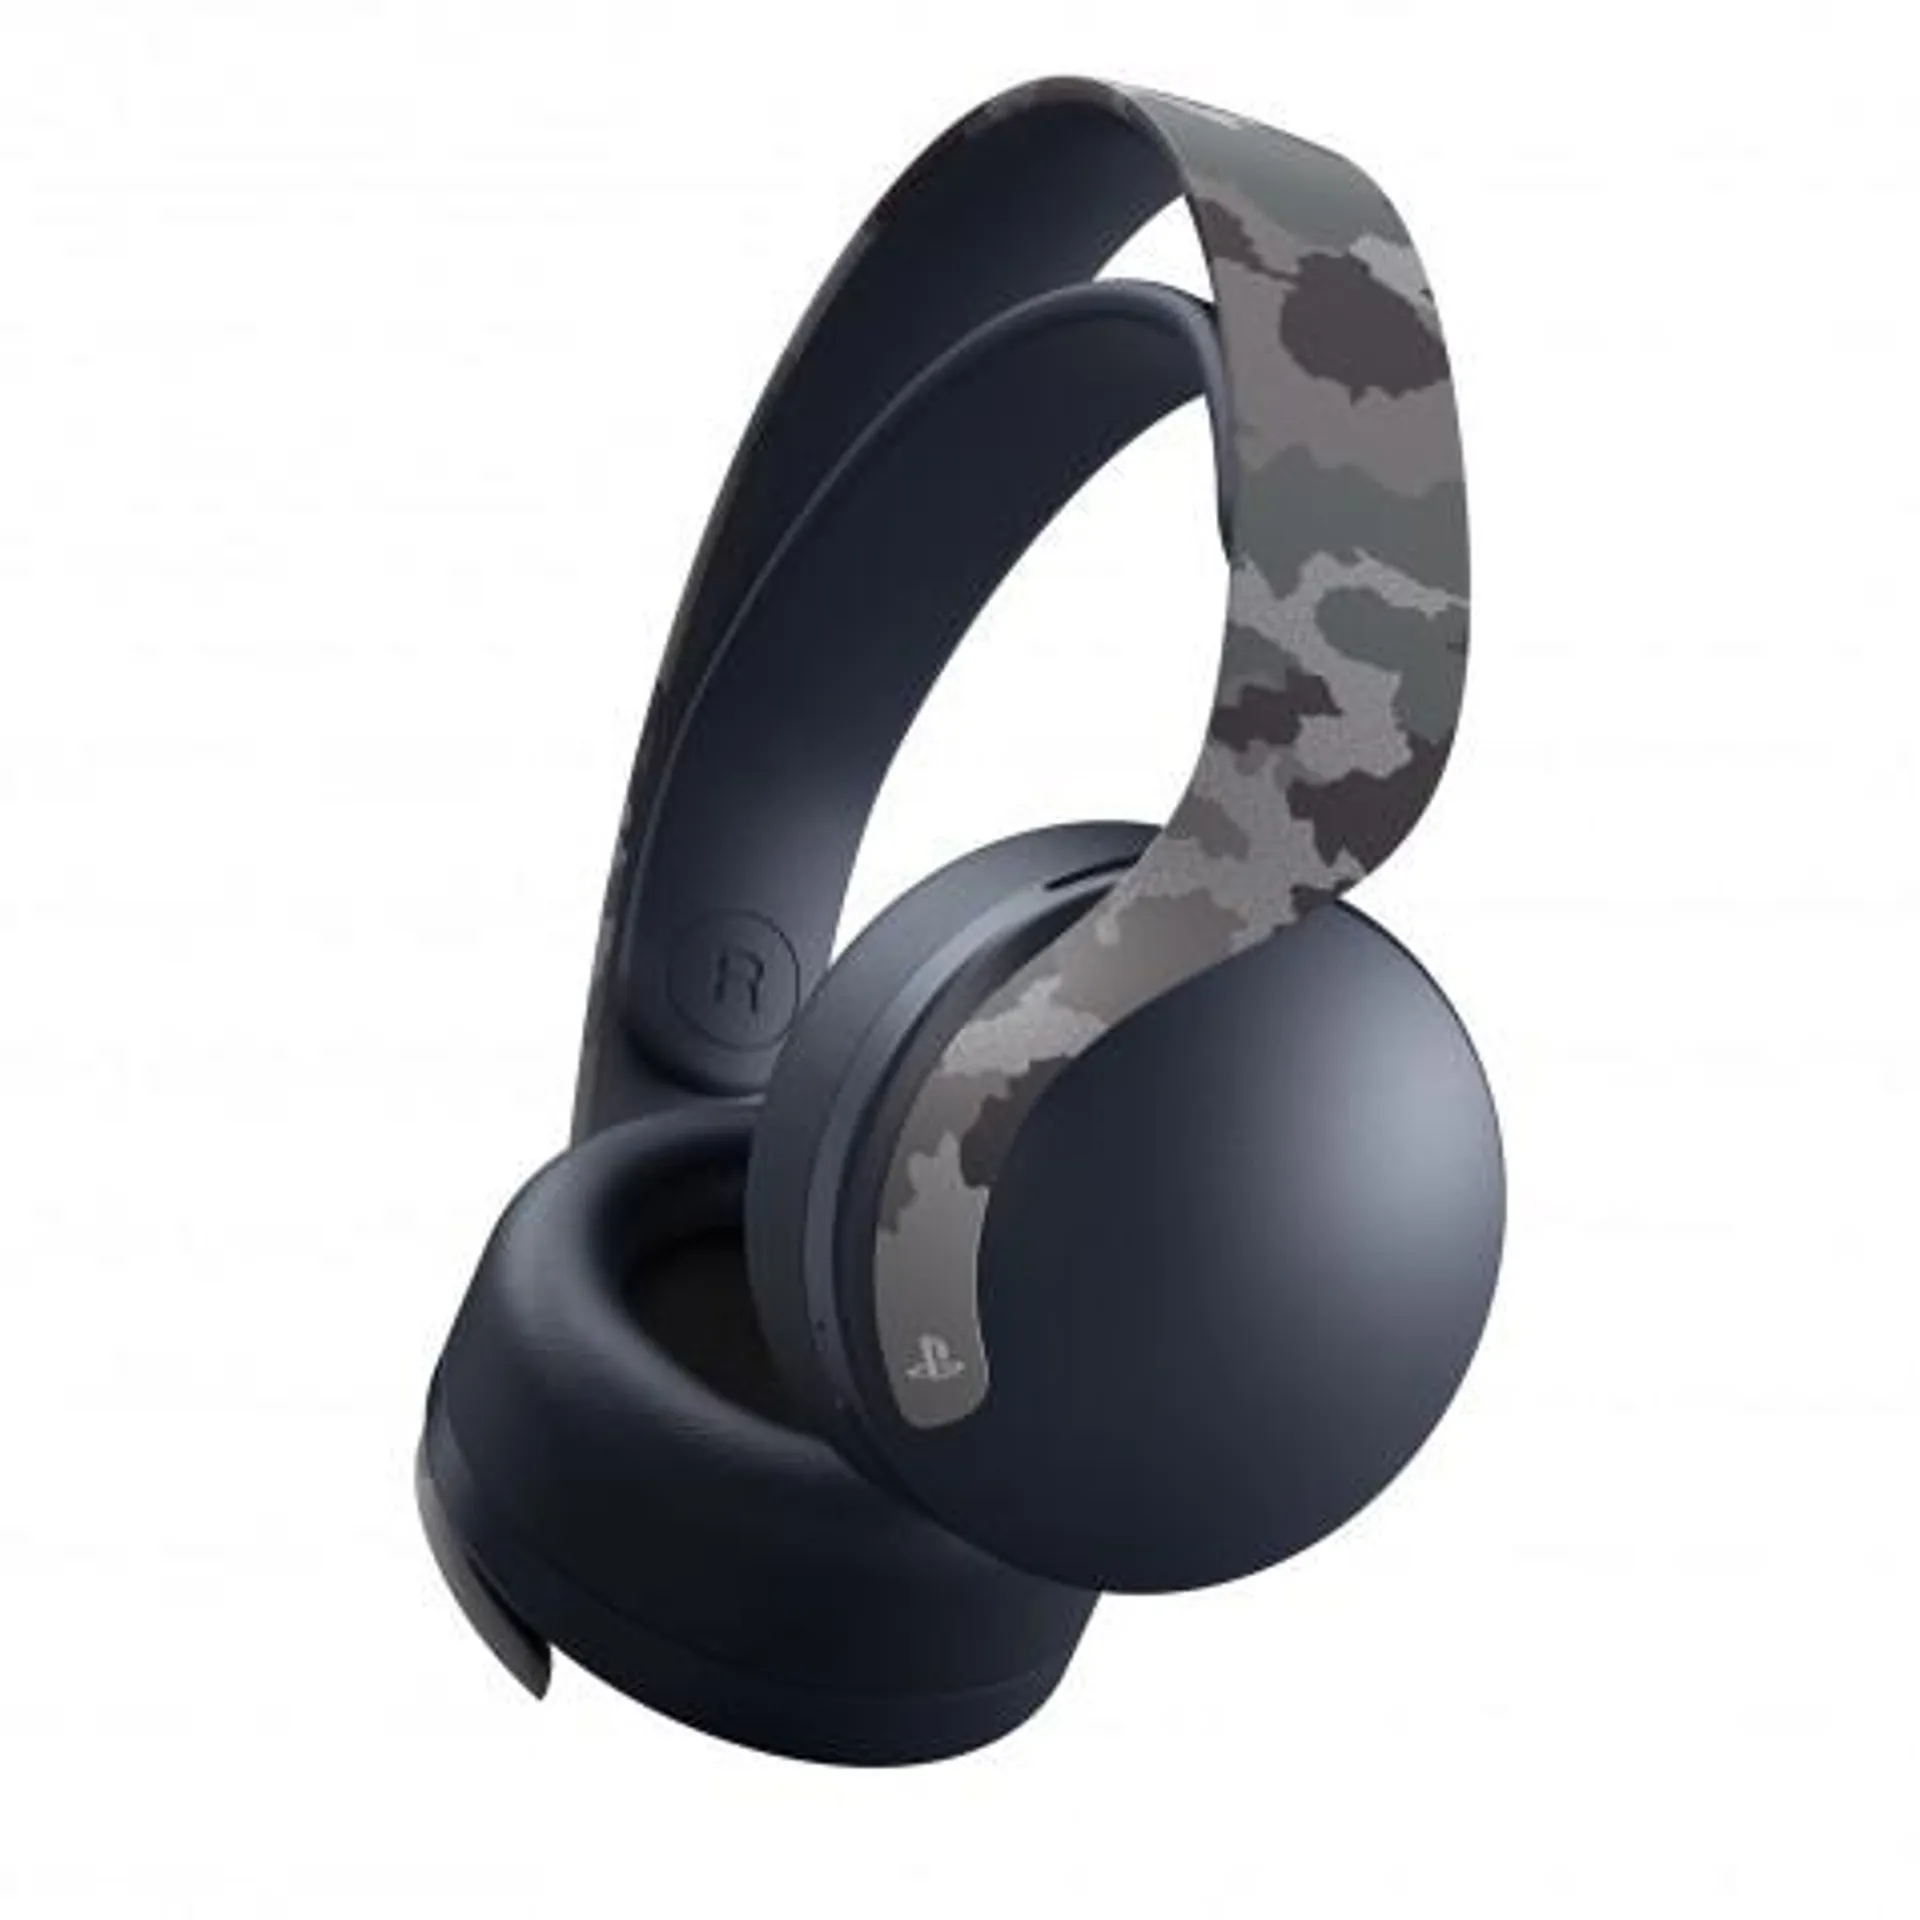 Sony PlayStation 5 PULSE 3D WL Headset 9406891 Grey Camouflage